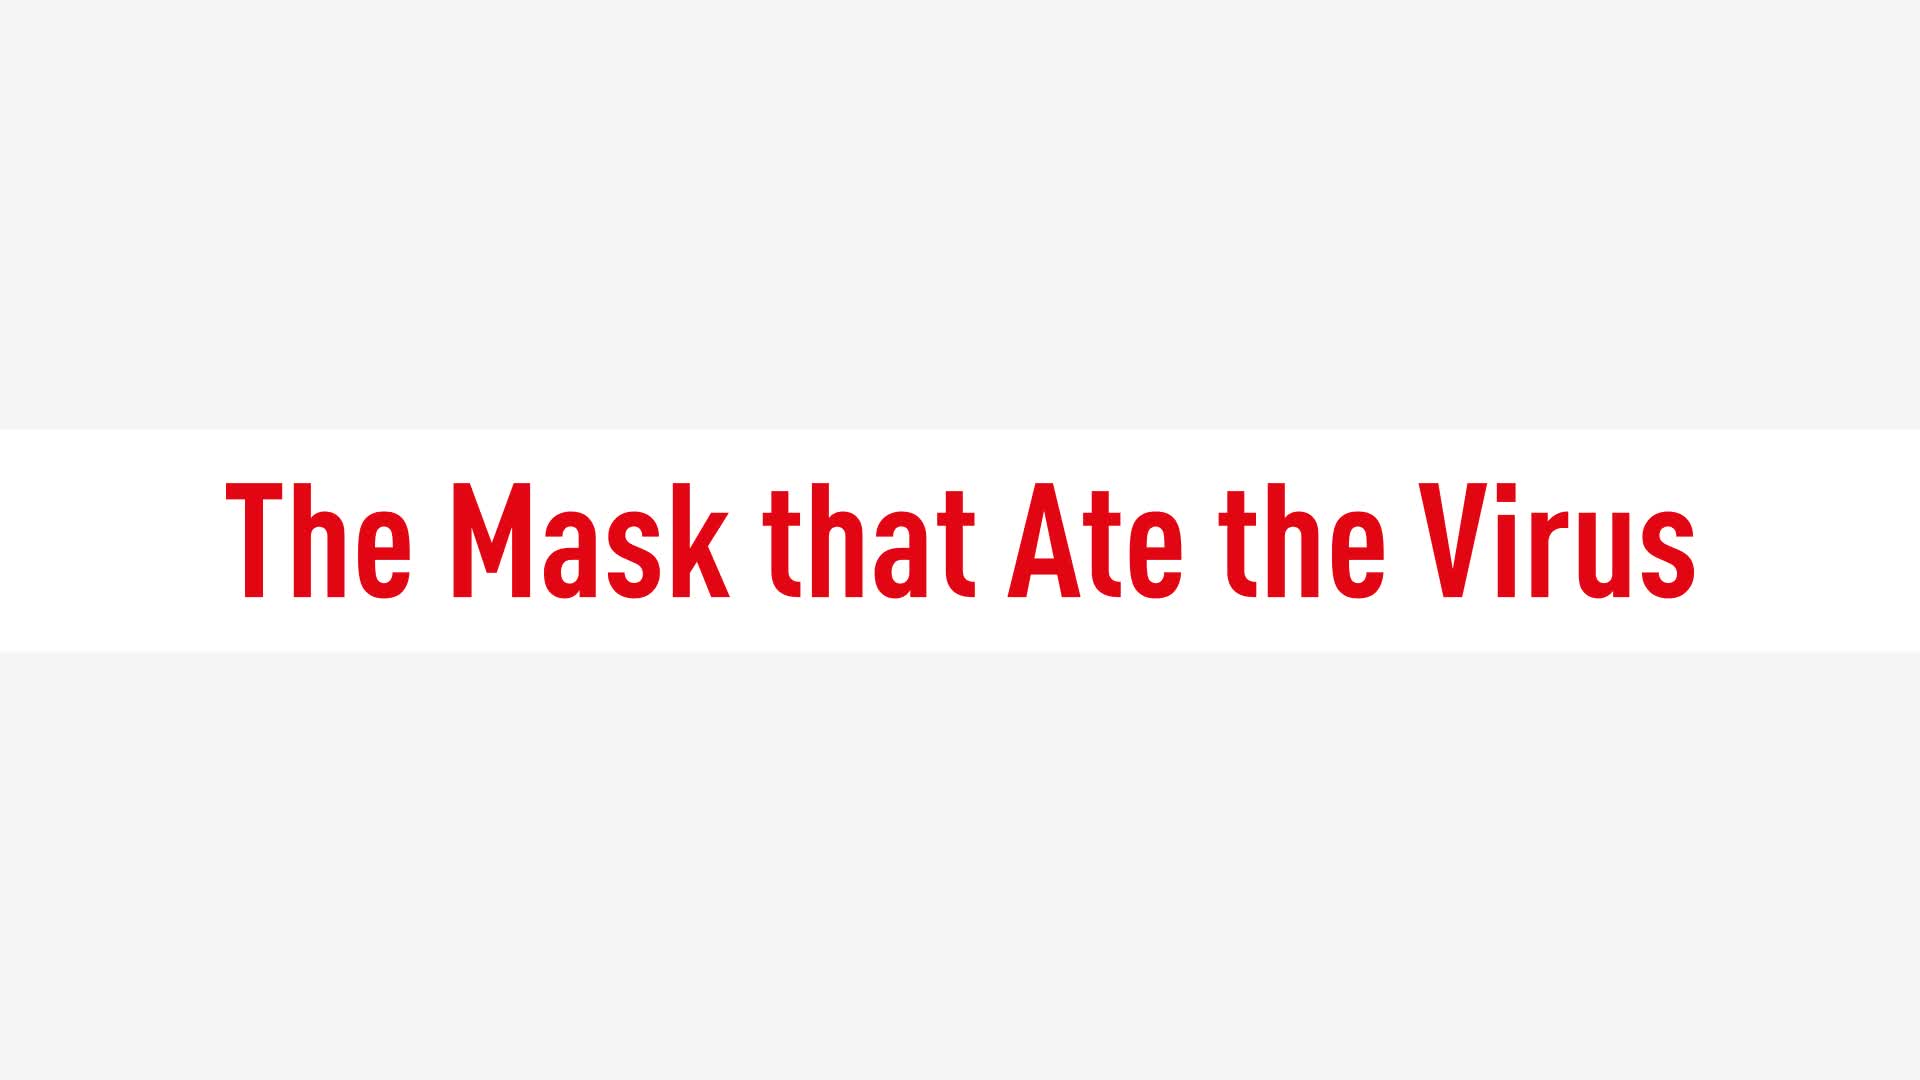 The Masks that Ate the Virus